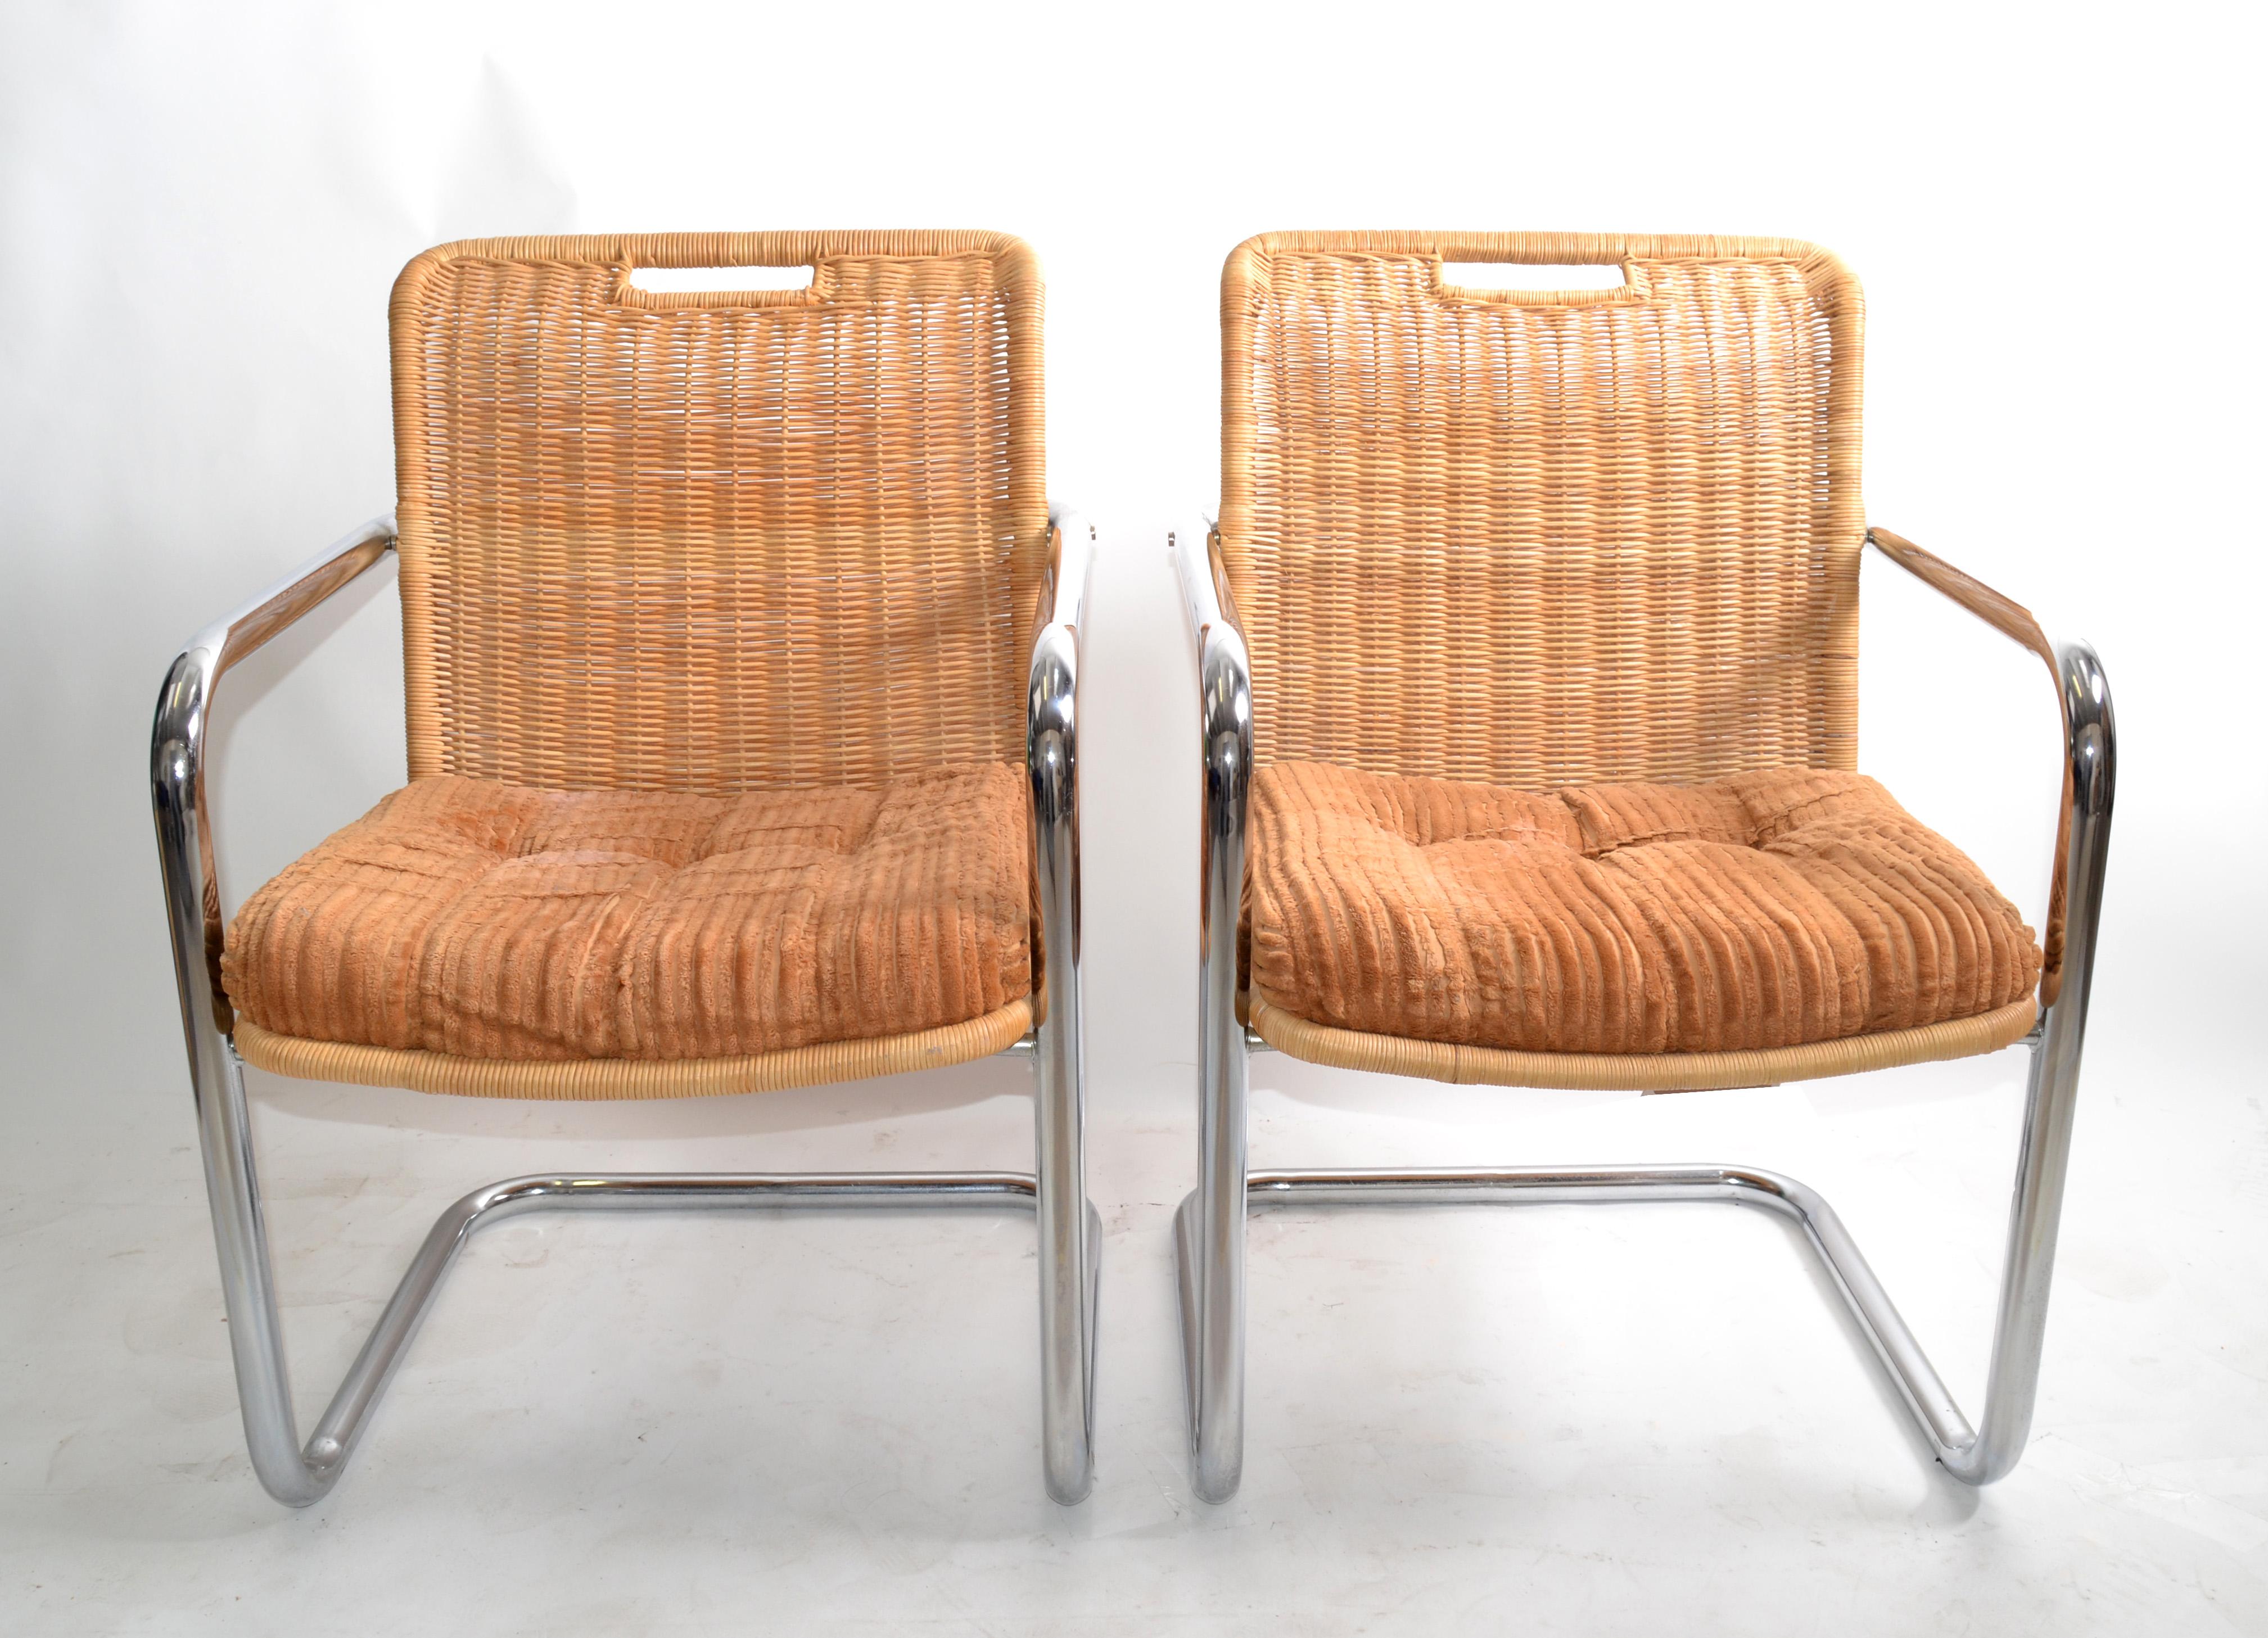 Pair of Harvey Probber attributed armchairs or dining room chairs in brown seat upholstery and wicker backrest.
Solid chrome tubular frames with cantilever swing, very comfortable.
Both chairs have original paper tag under the seat.
Arm height: 24.5